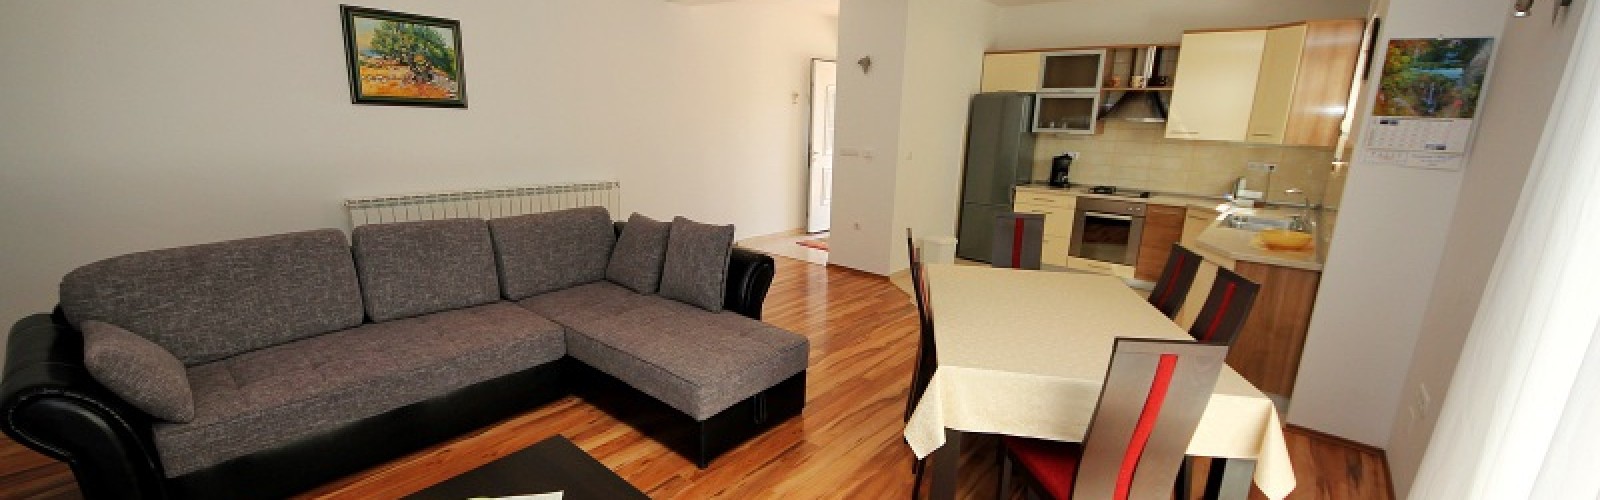 IMG 4142 1600x500 - Comfort Two Bedroom Apartment with Terrace - D